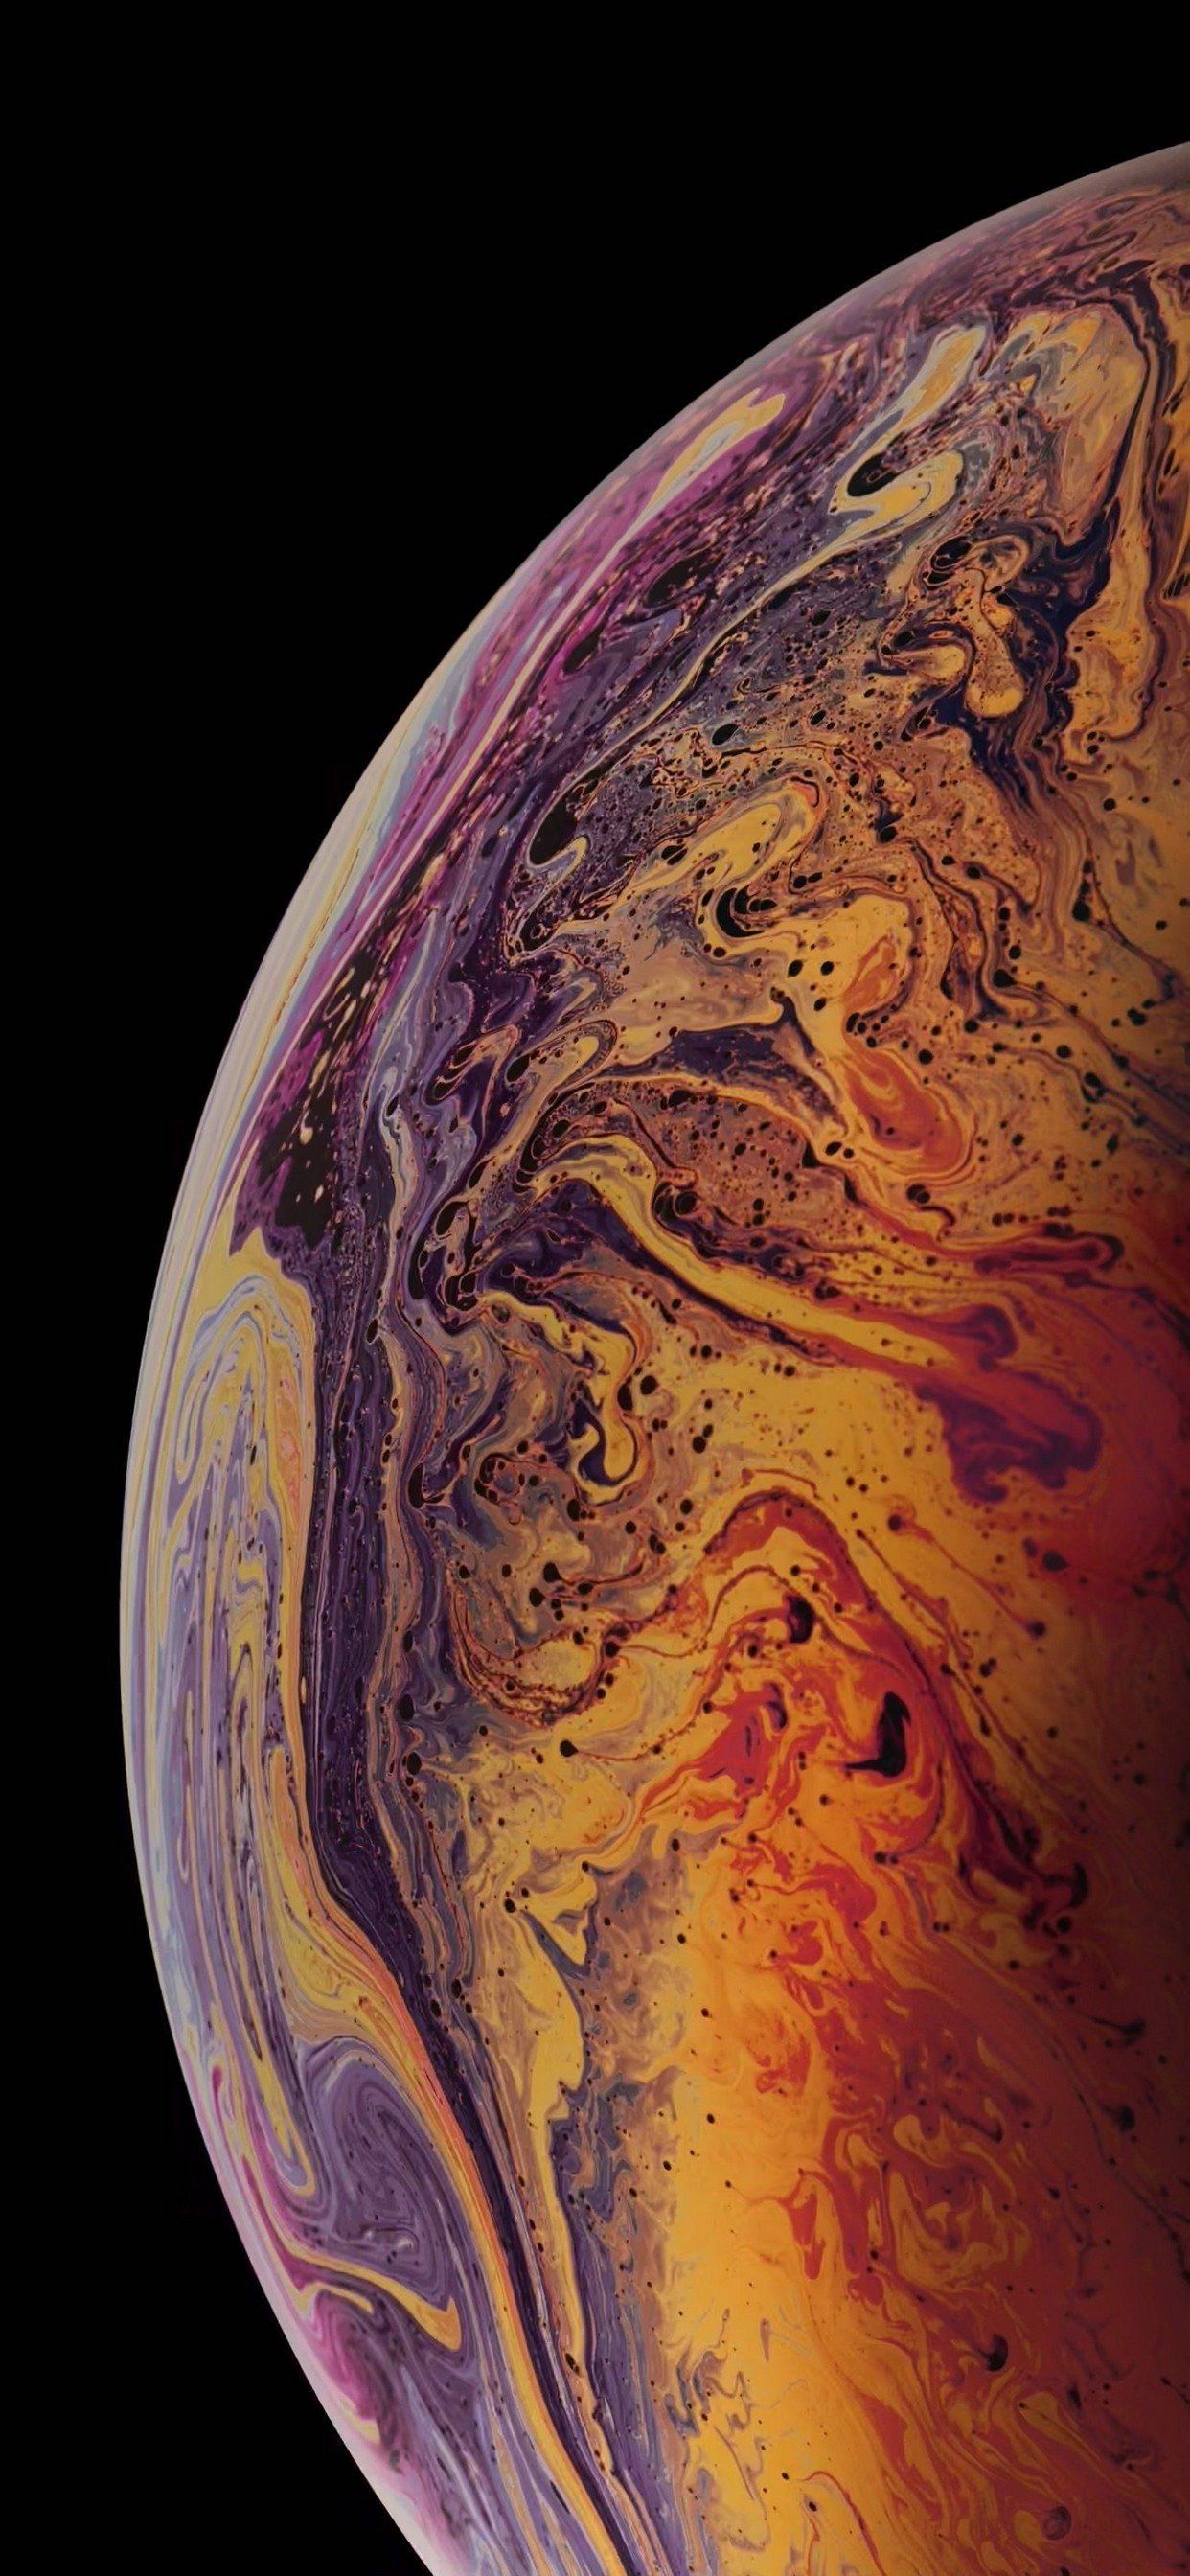 Live Wallpapers Missing on XS Max in IOS 121  MacRumors Forums